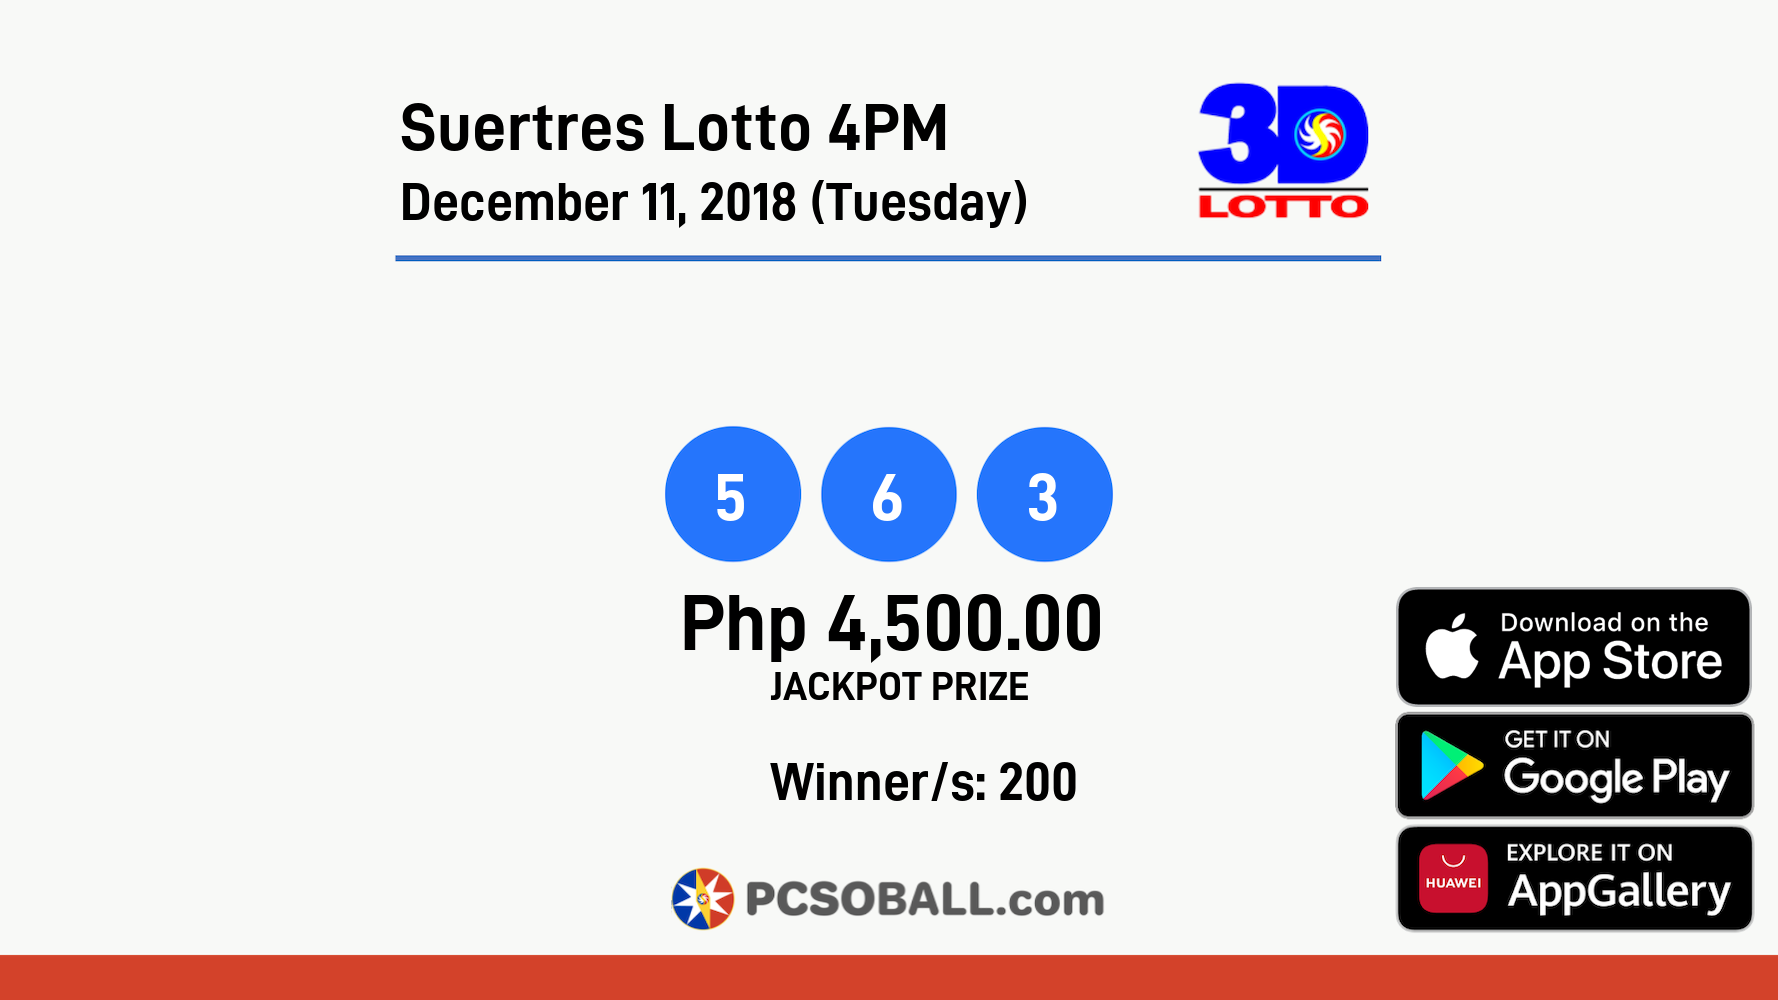 Suertres Lotto 4PM December 11, 2018 (Tuesday) Result